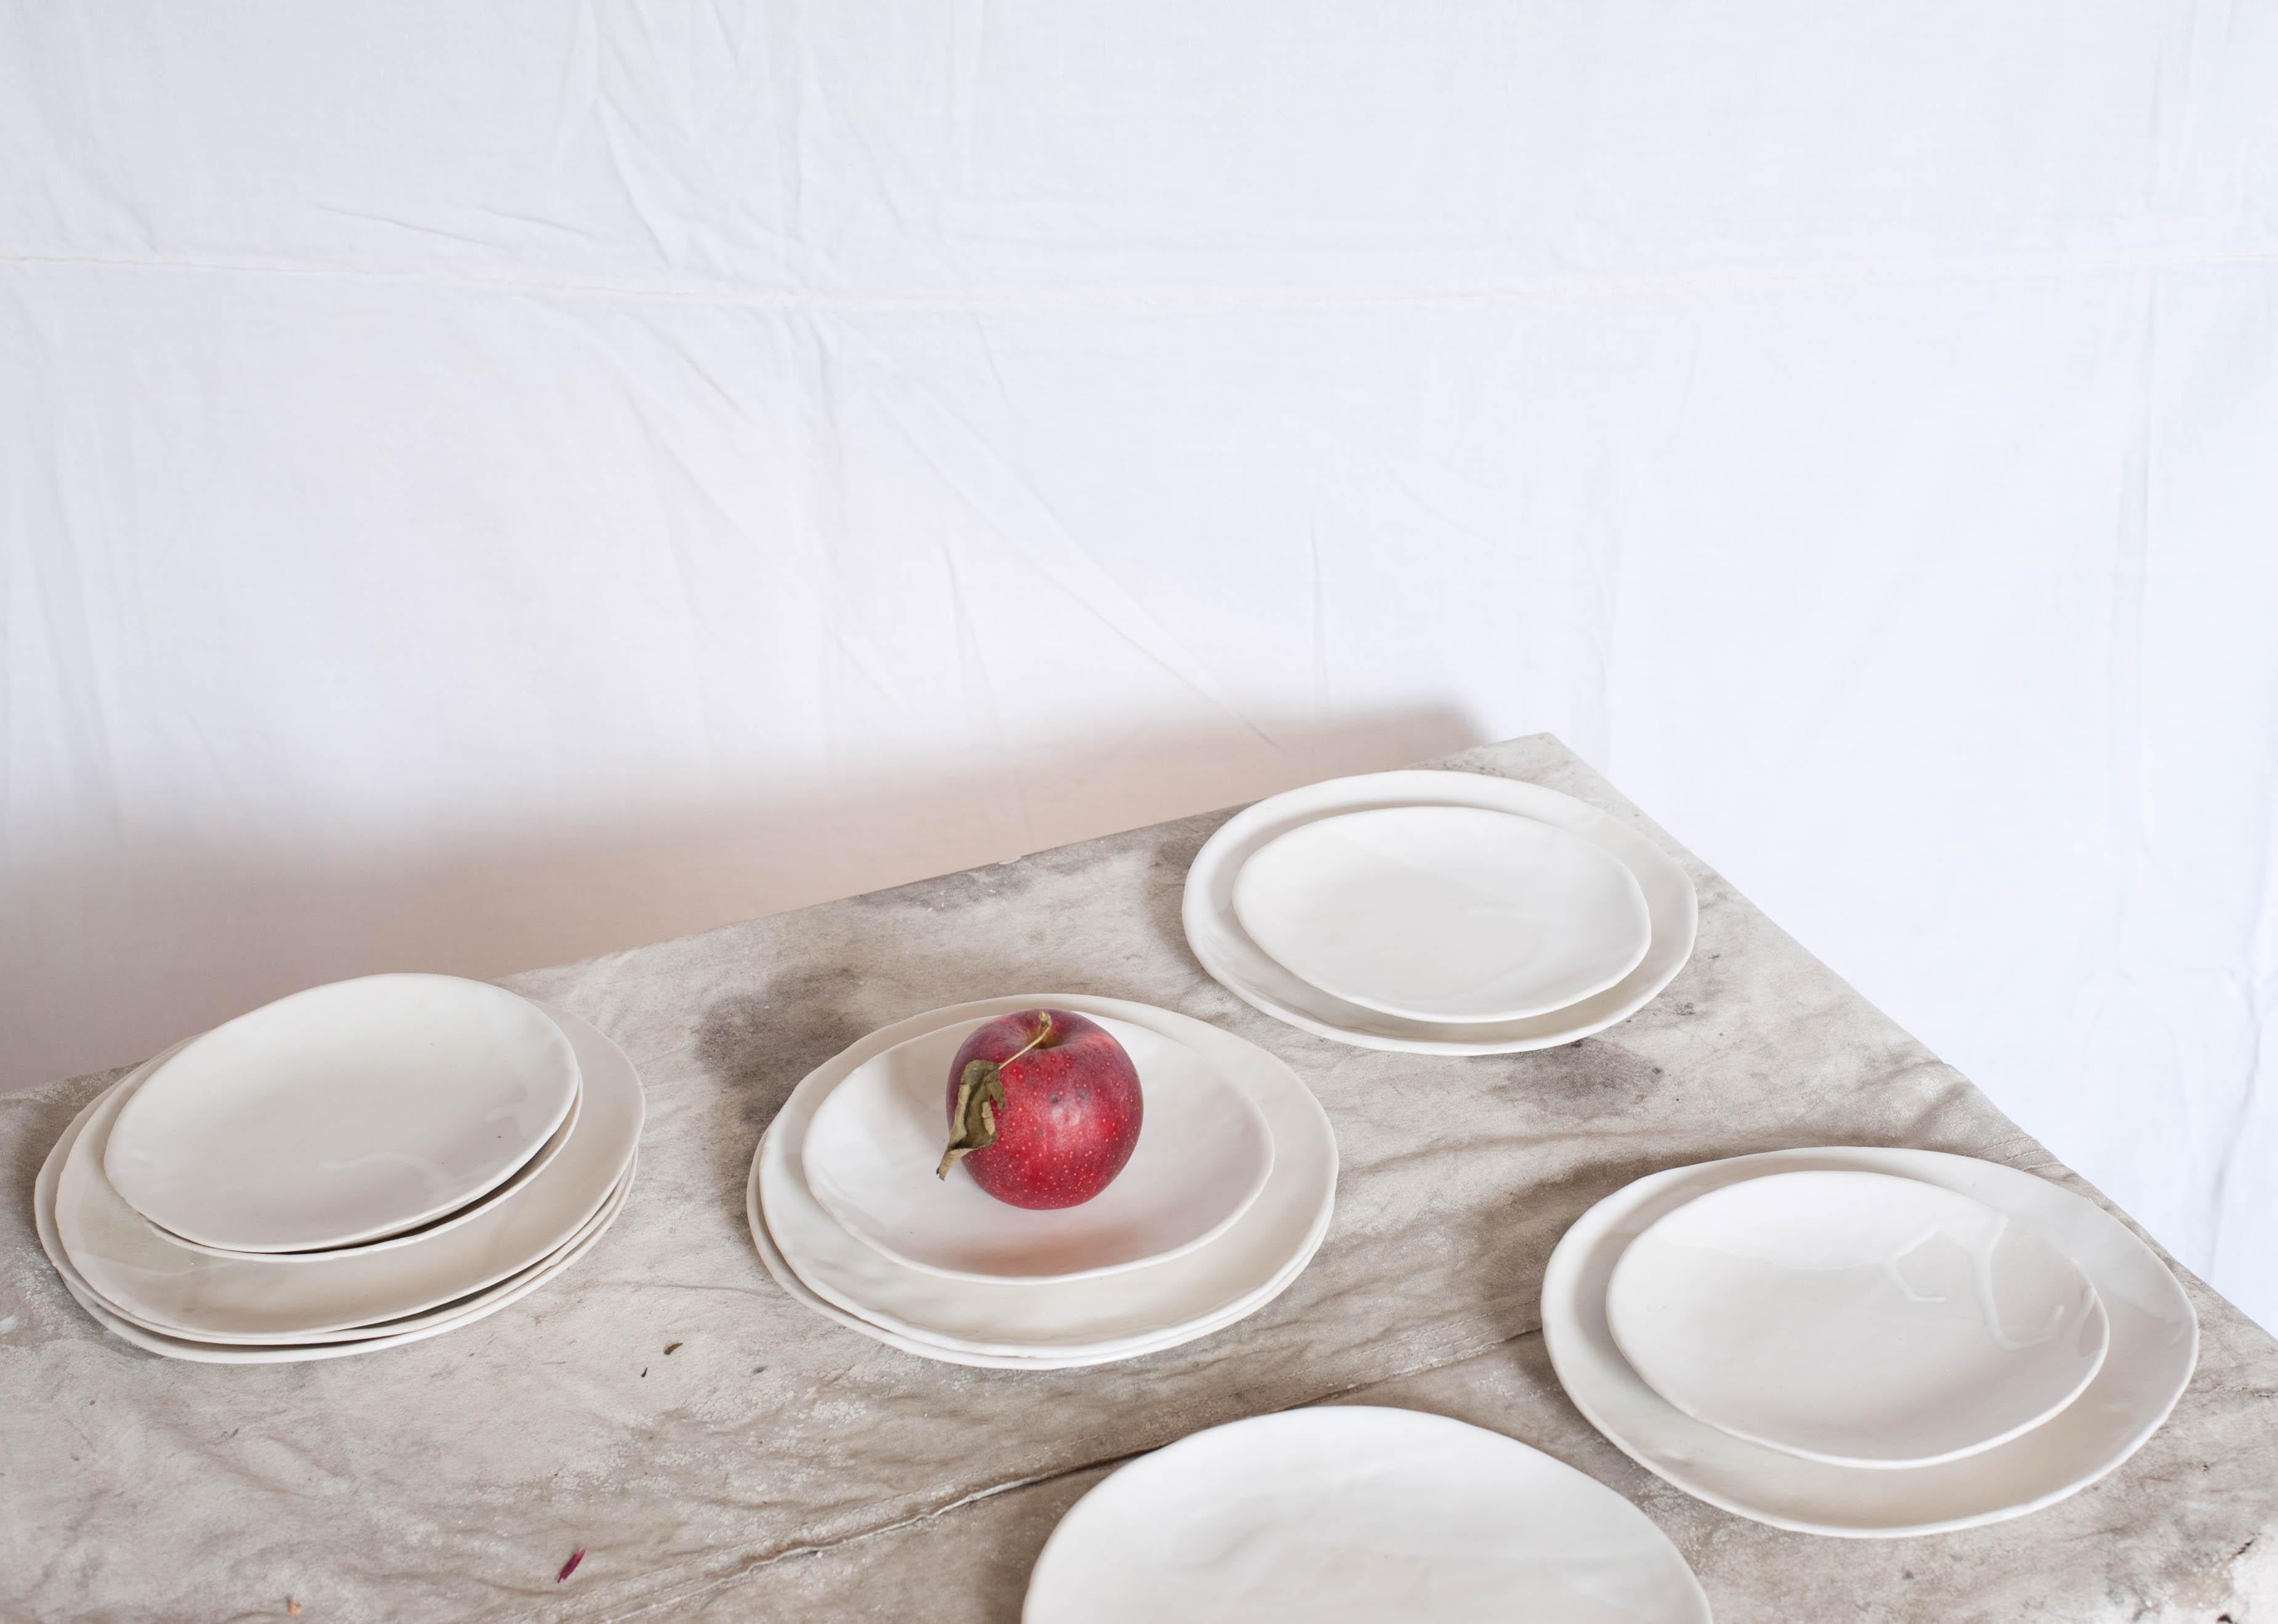 Layers of matte and glossy white glaze on slab-formed, imperfectly round, porcelain plates. Each plate is glazed differently, and looks great alone or as part of a set.

Approximate dimensions: 

Dinner: 10.5 $60

Salad: 8.5 $45

Bread: 7